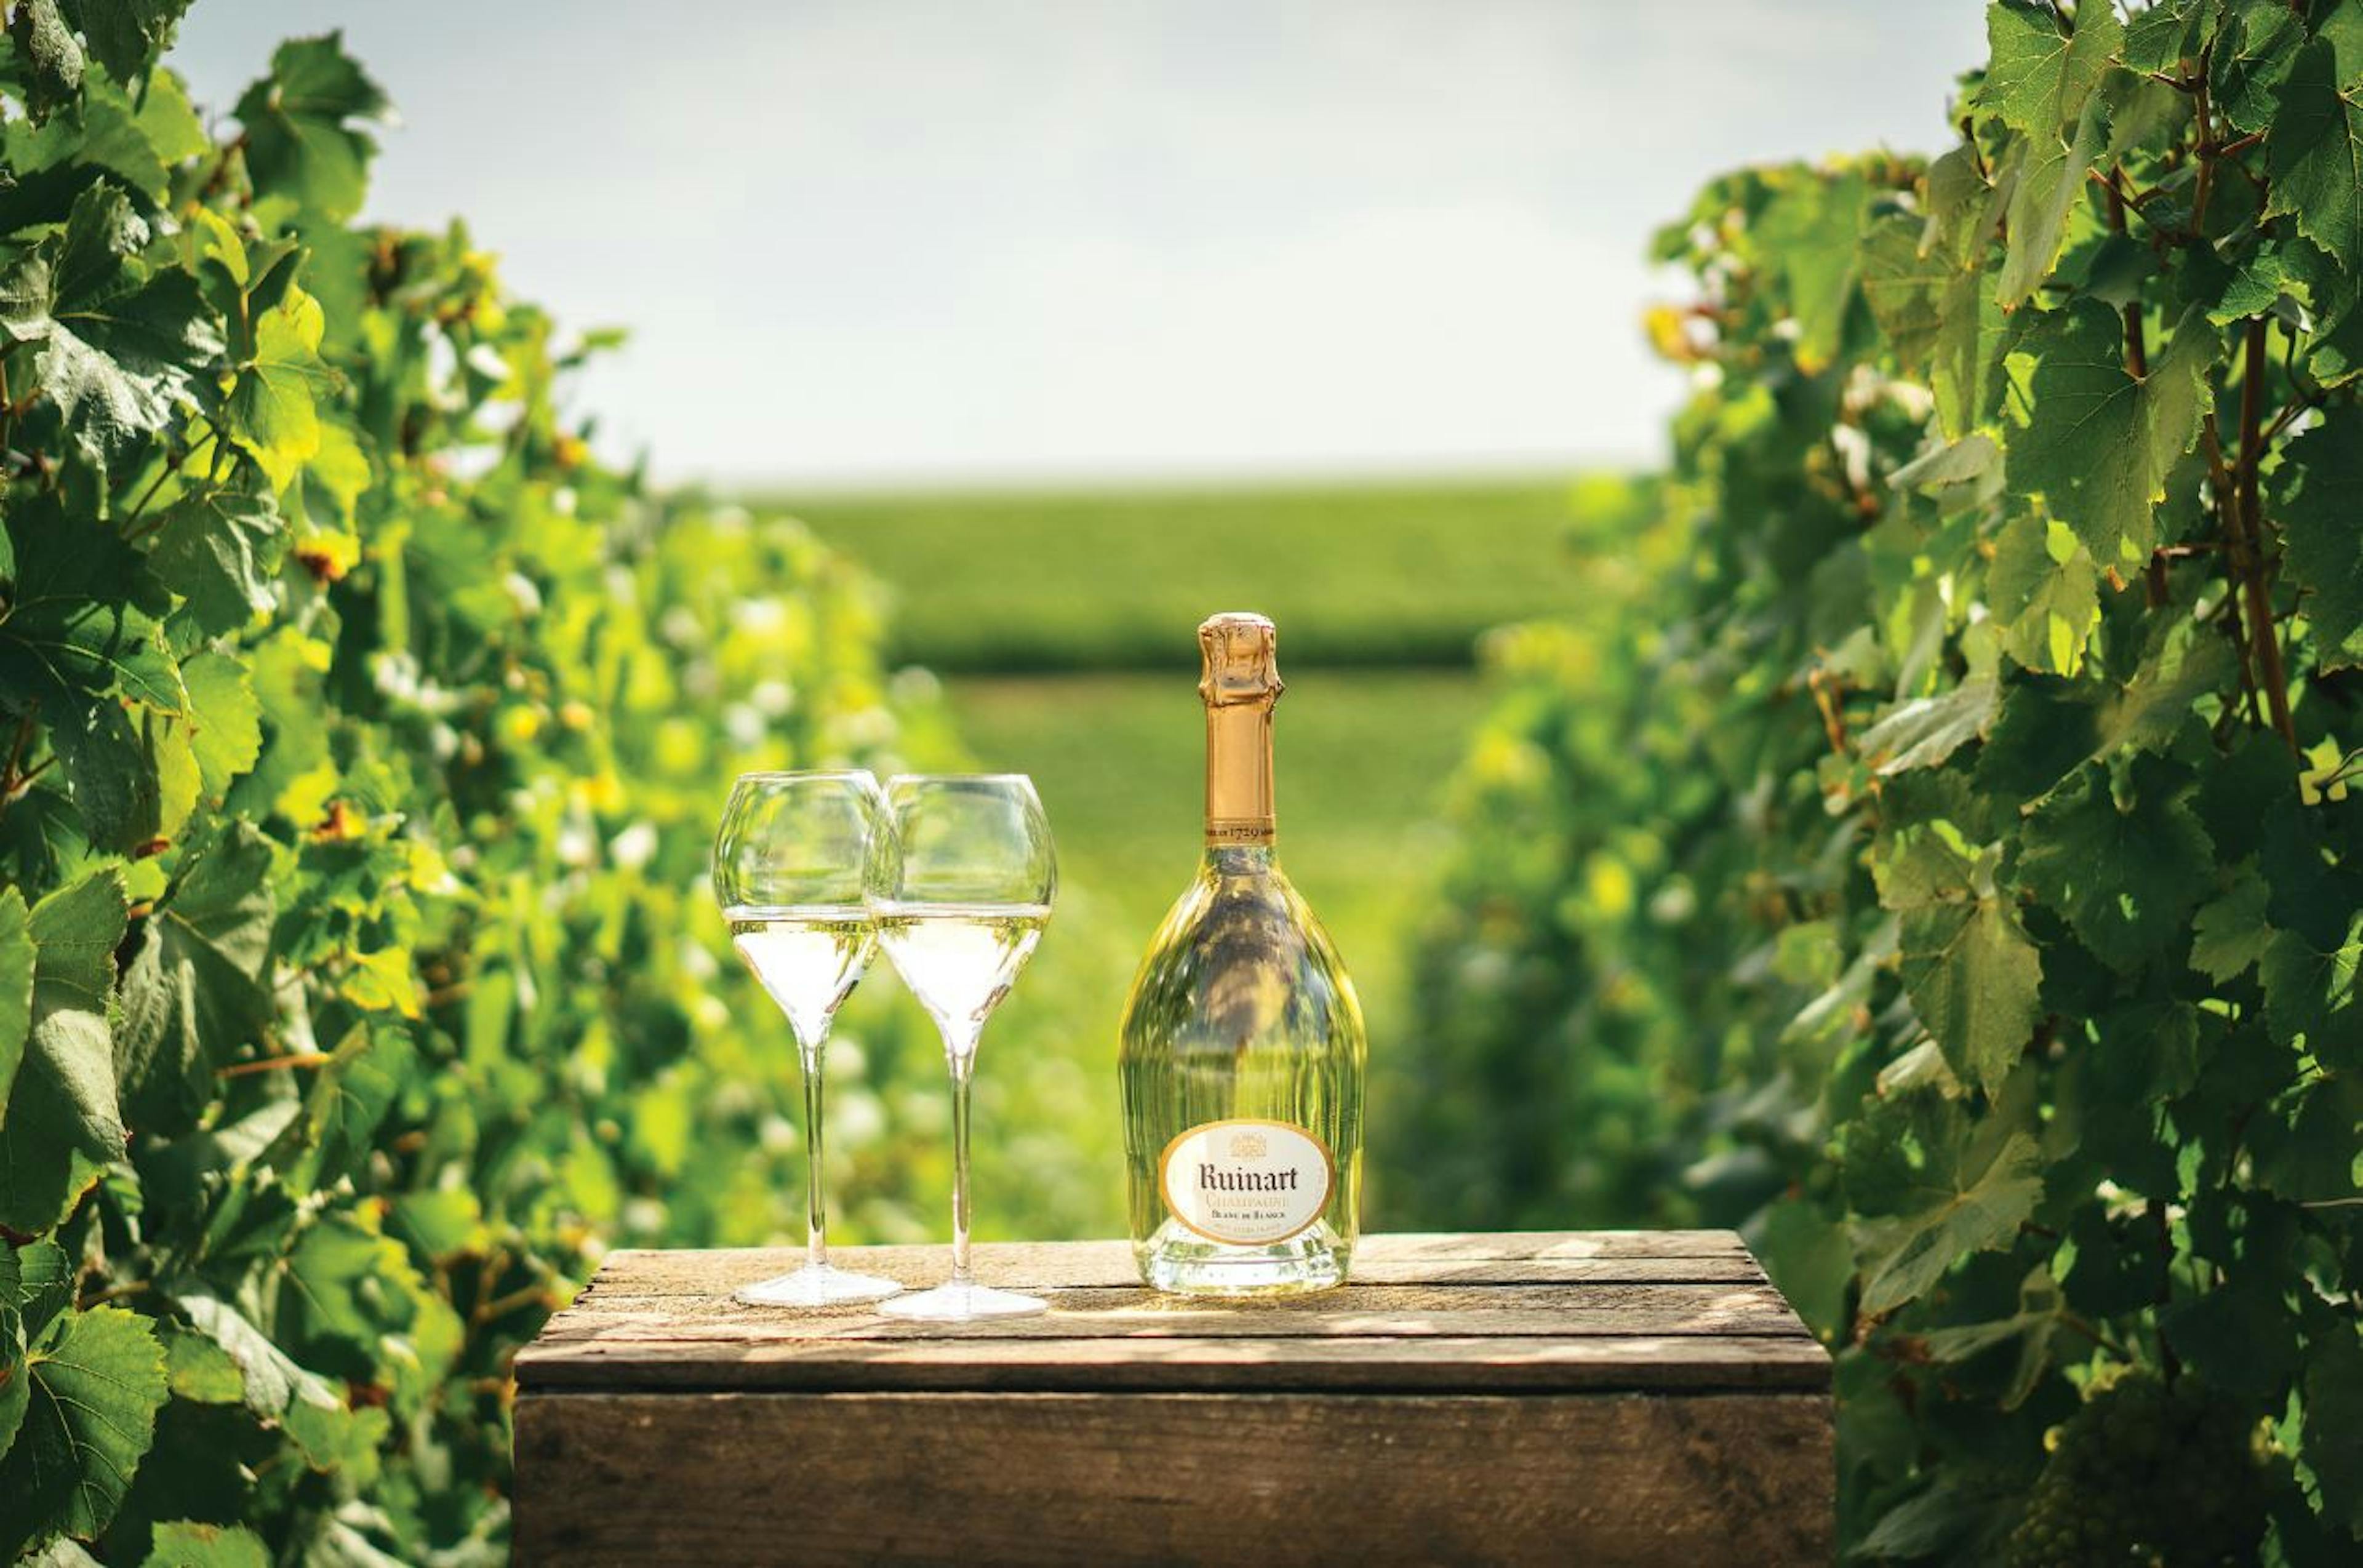 Each Ruinart cuvée bears the distinctive signature of chardonnay, the House's emblematic grape variety.